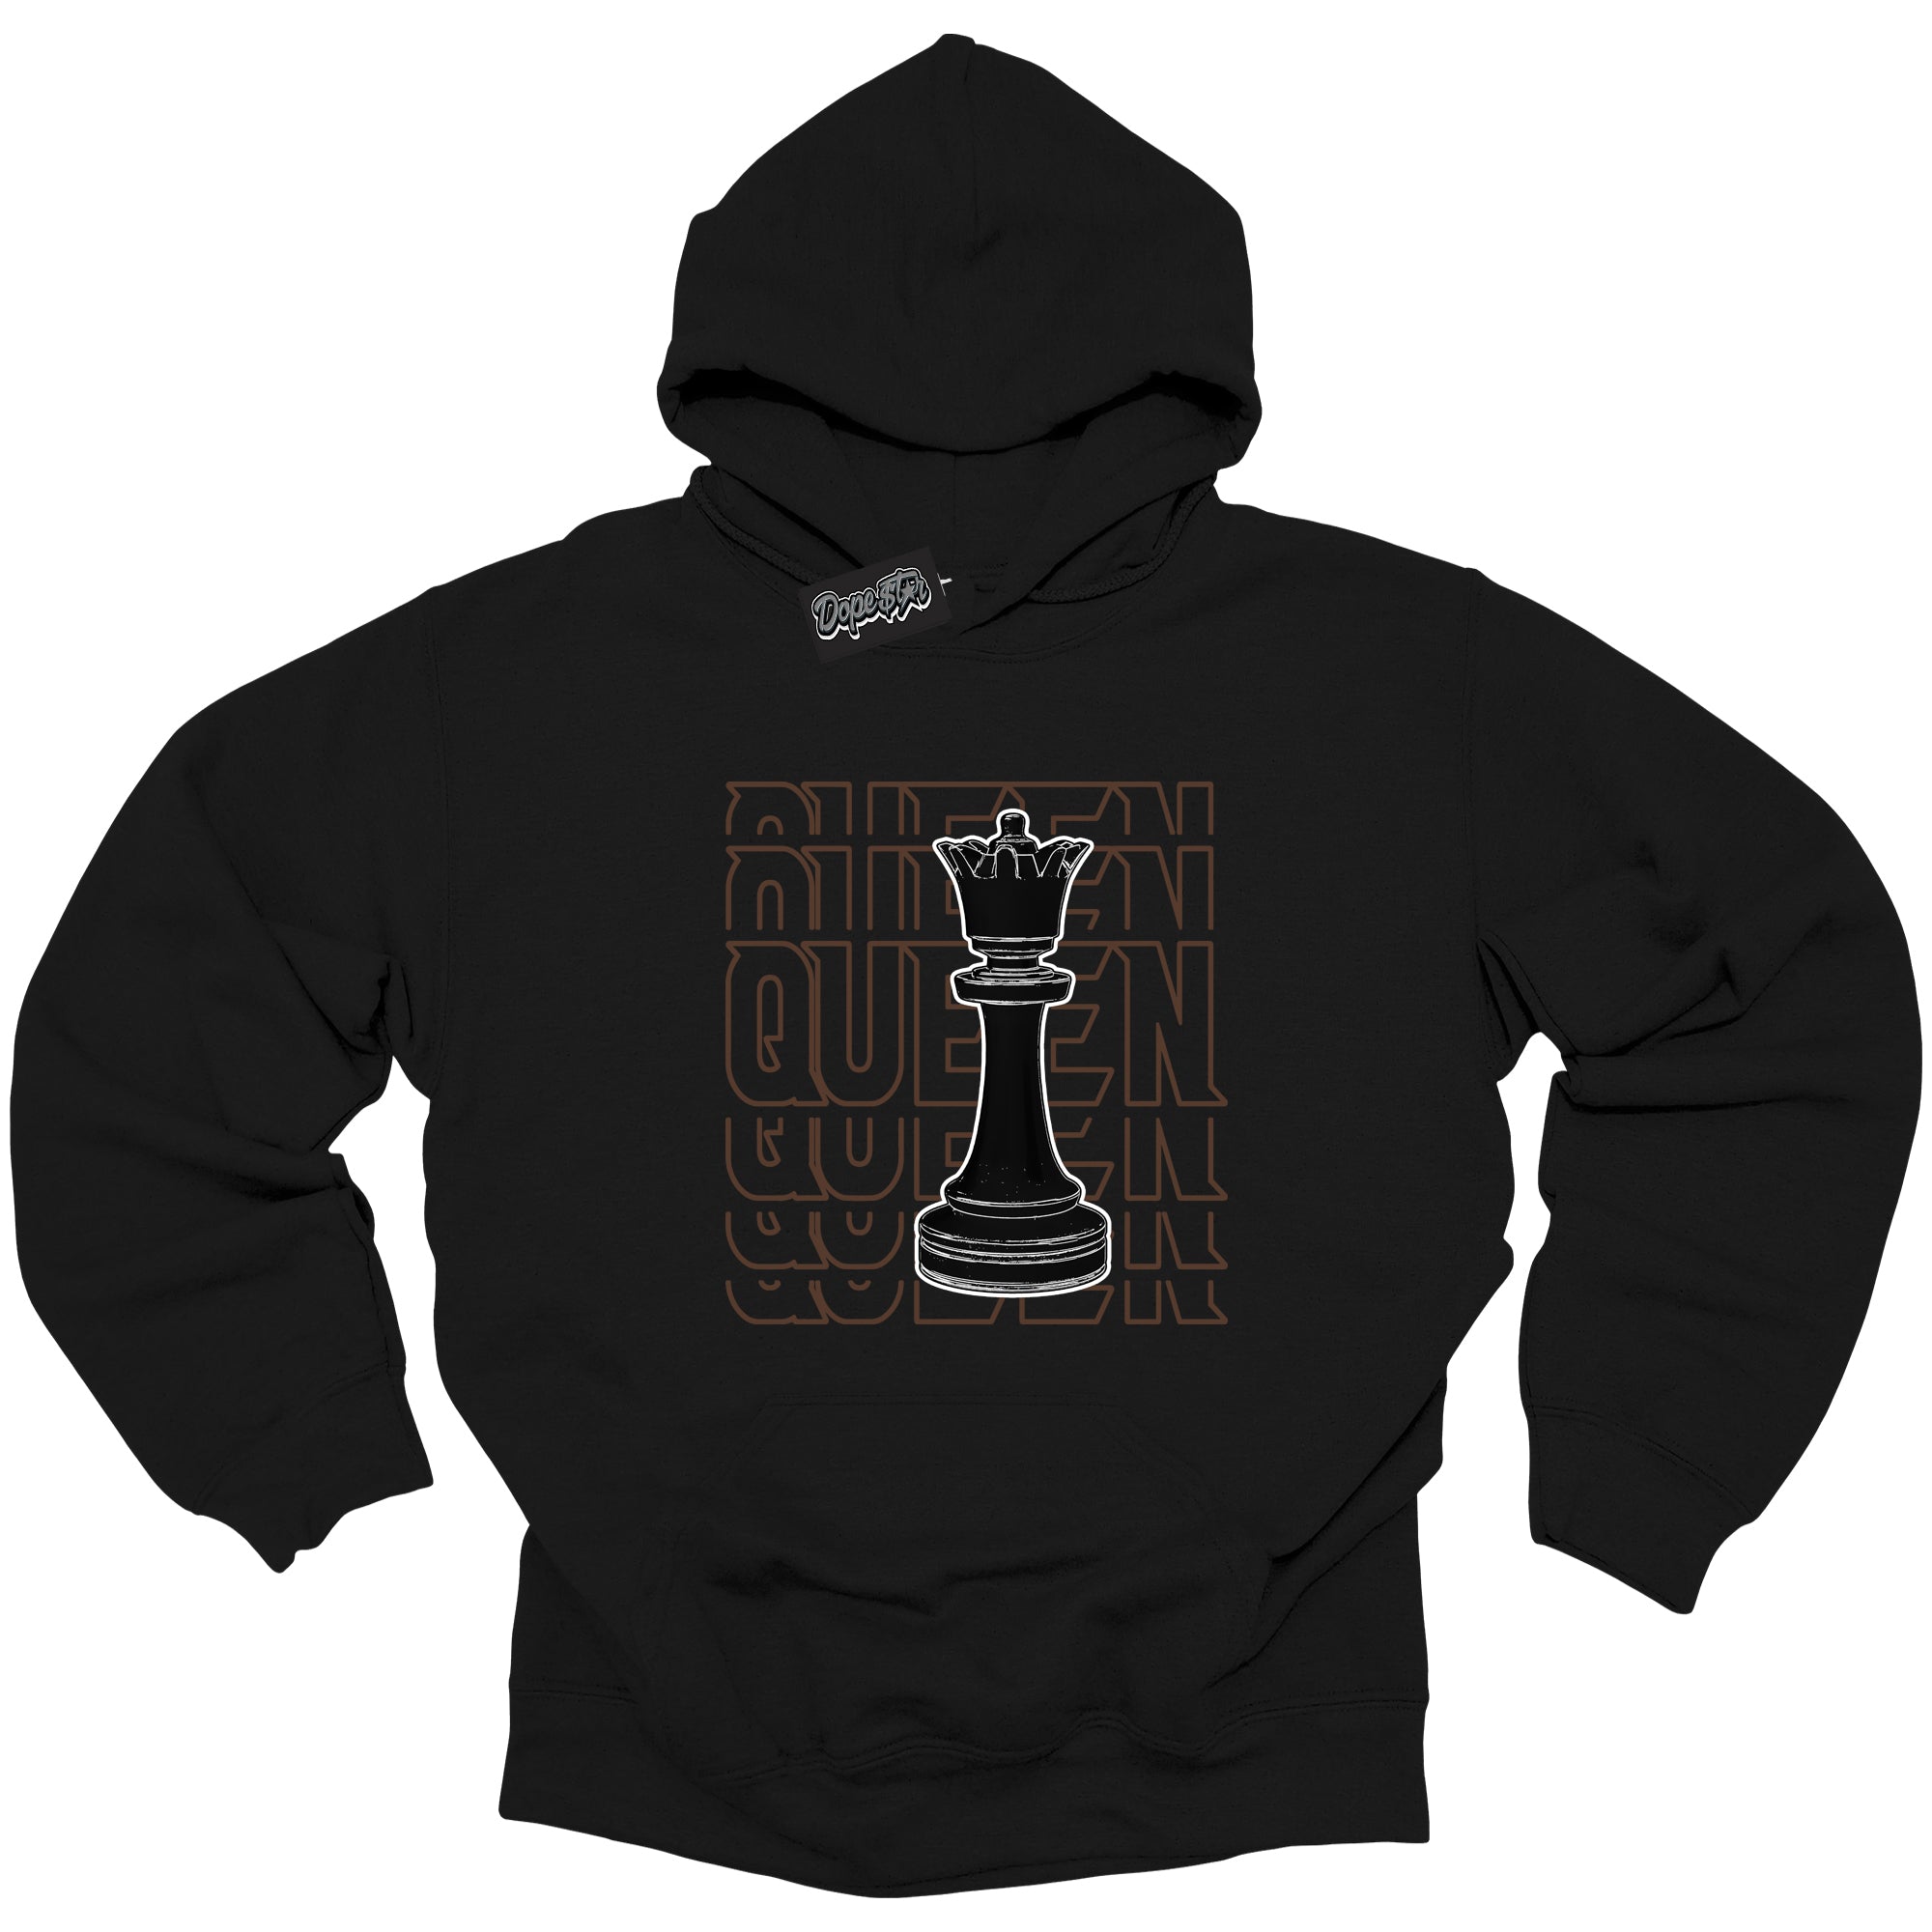 Cool Black Graphic DopeStar Hoodie with “ Queen Chess “ print, that perfectly matches Palomino 1s sneakers